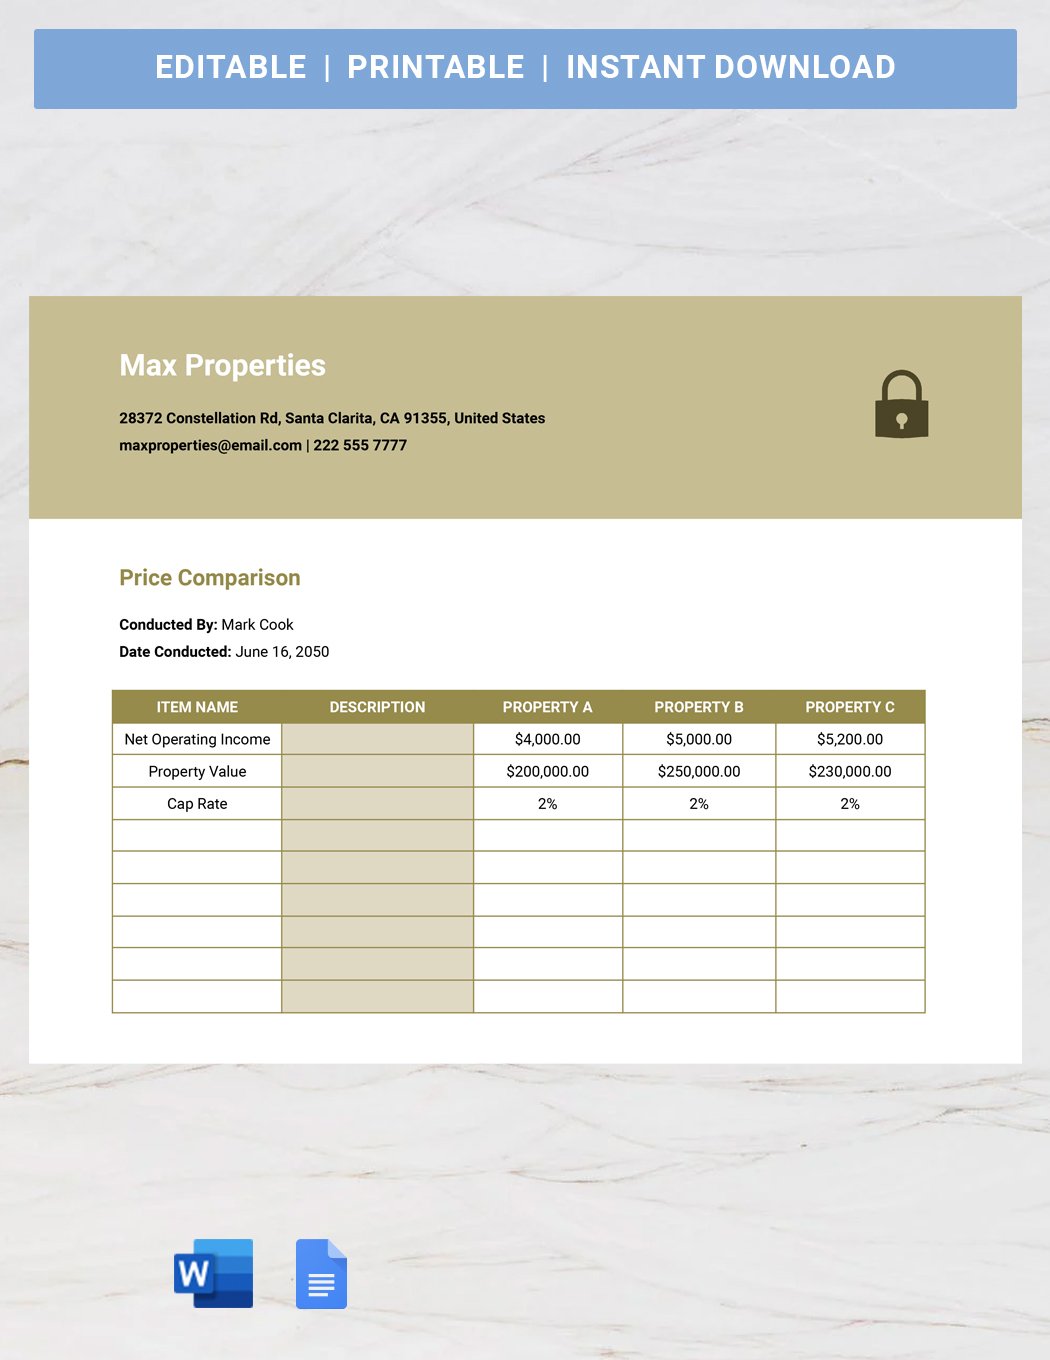 Rental Property Roi And Cap Rate Comparison Template in Word, Google Docs, Apple Pages